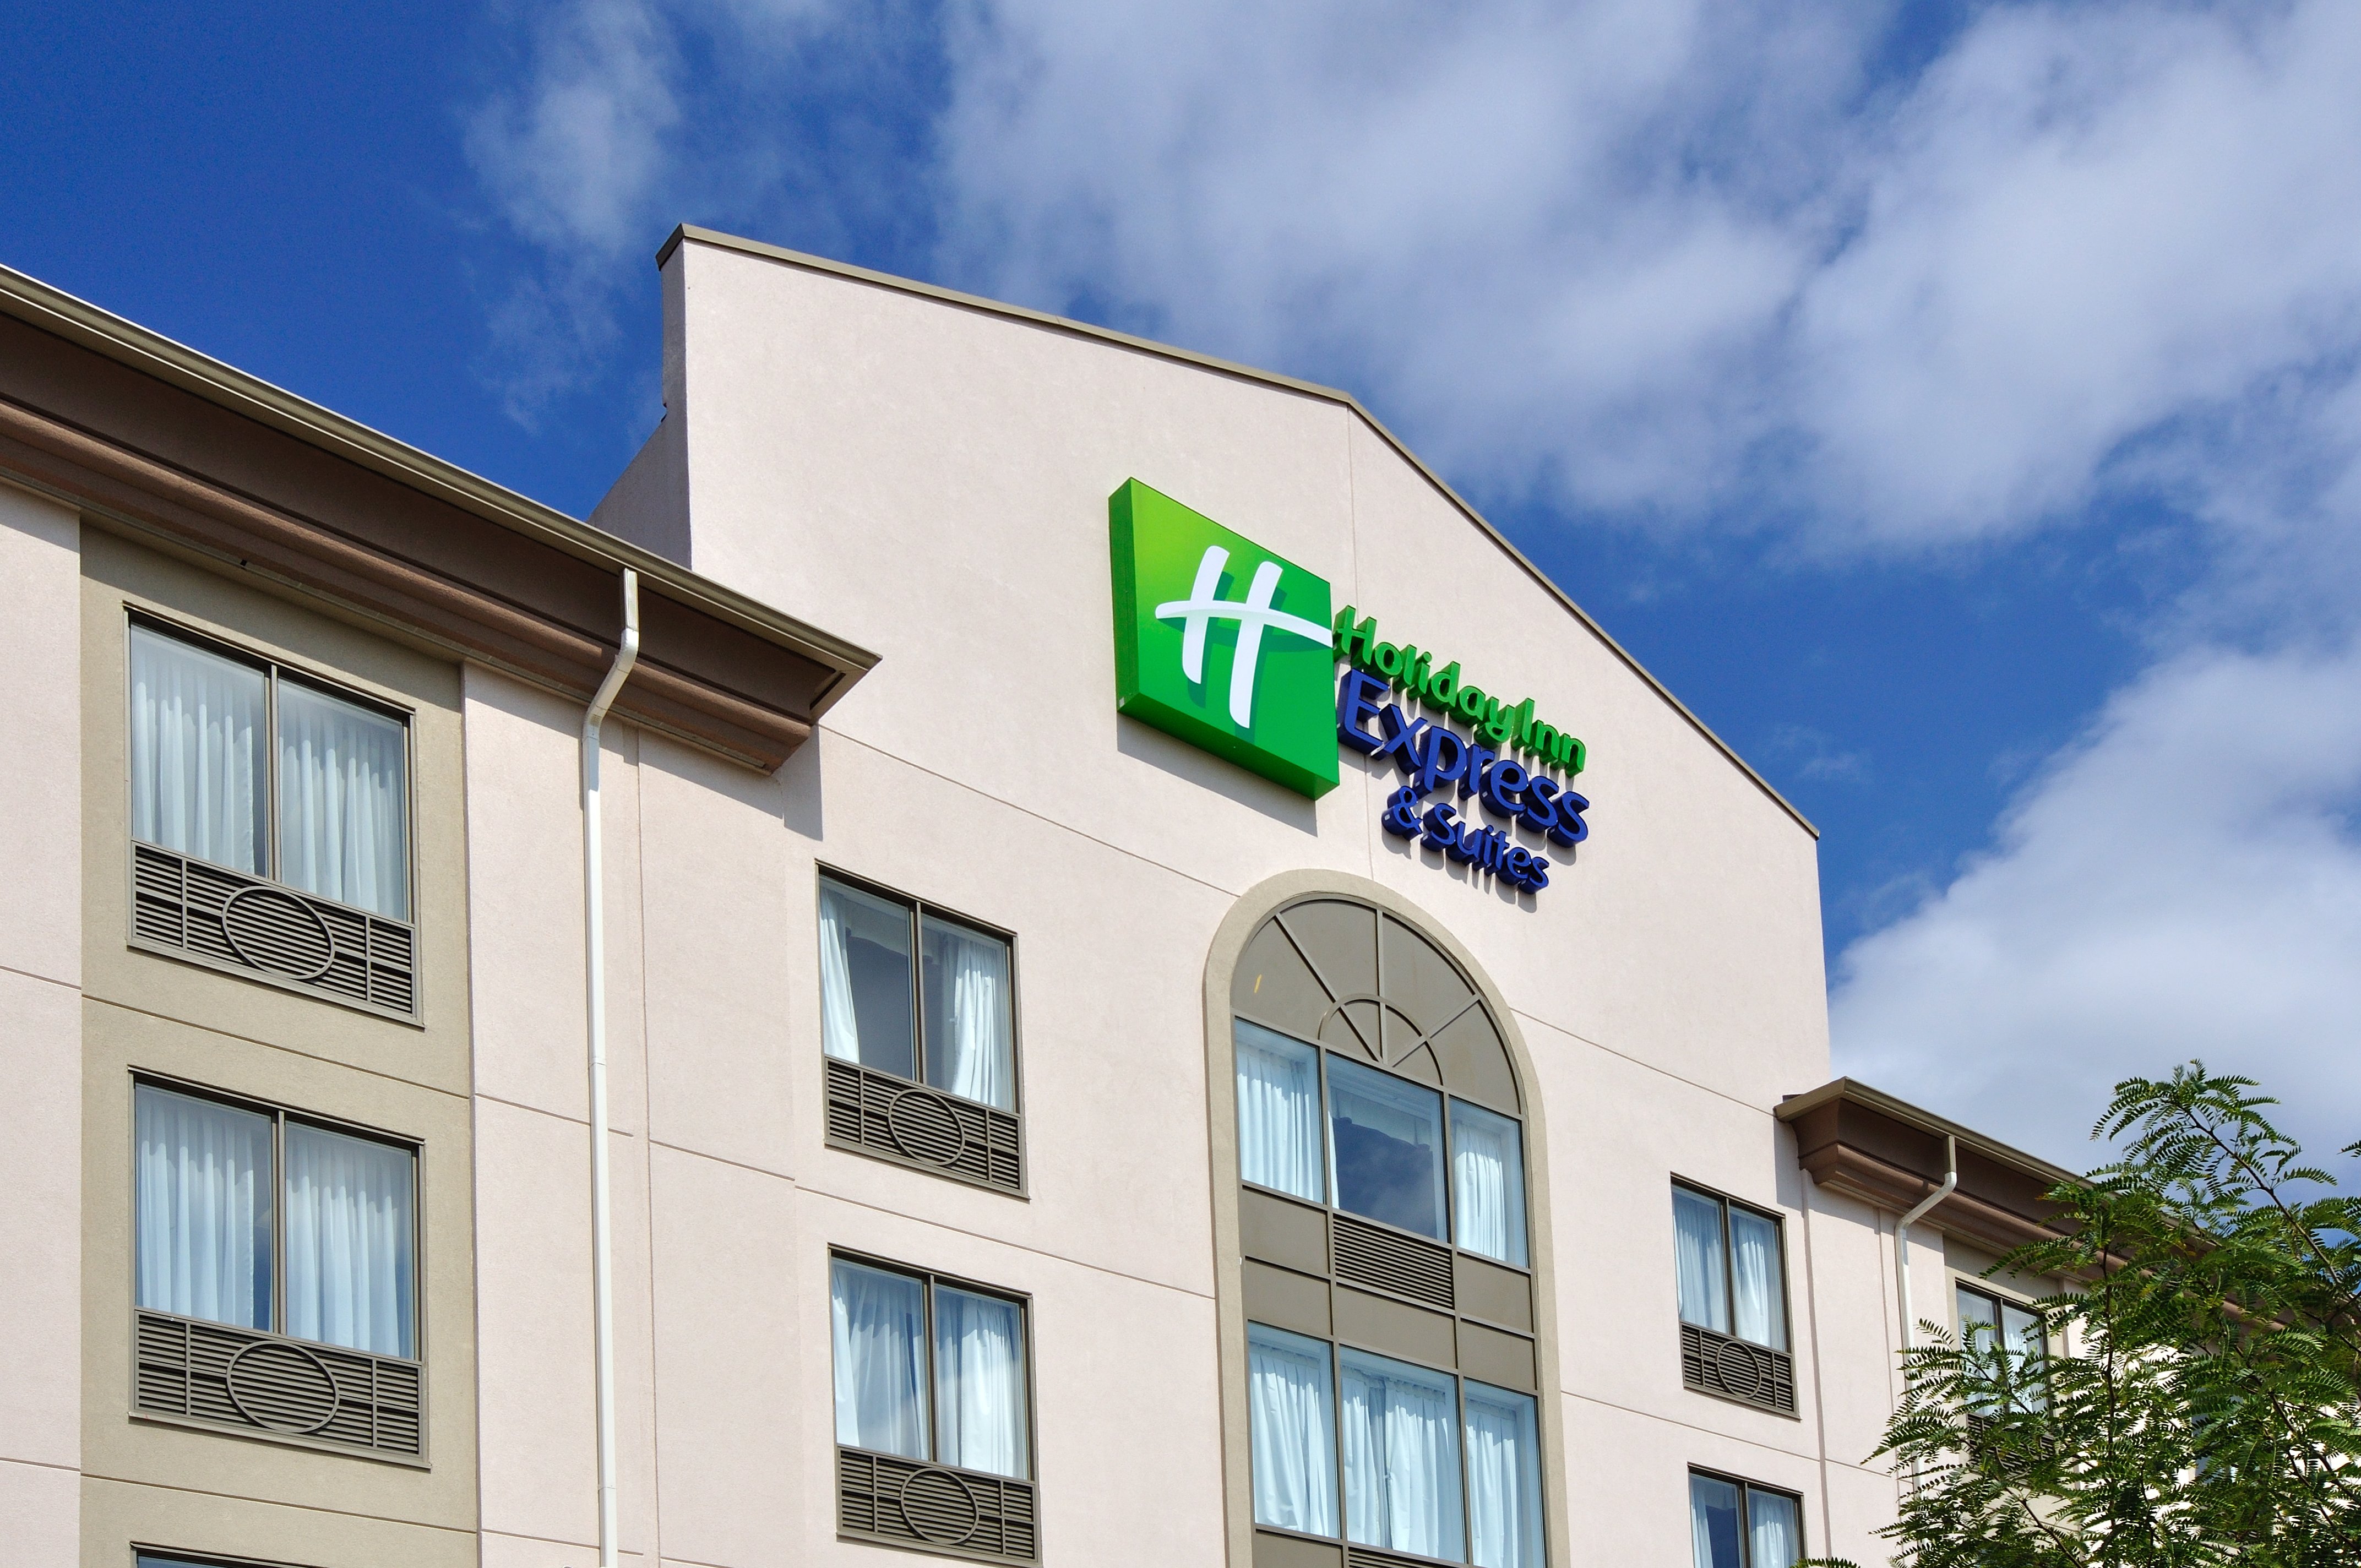 Welcome to the Holiday Inn Express Ottawa Airport